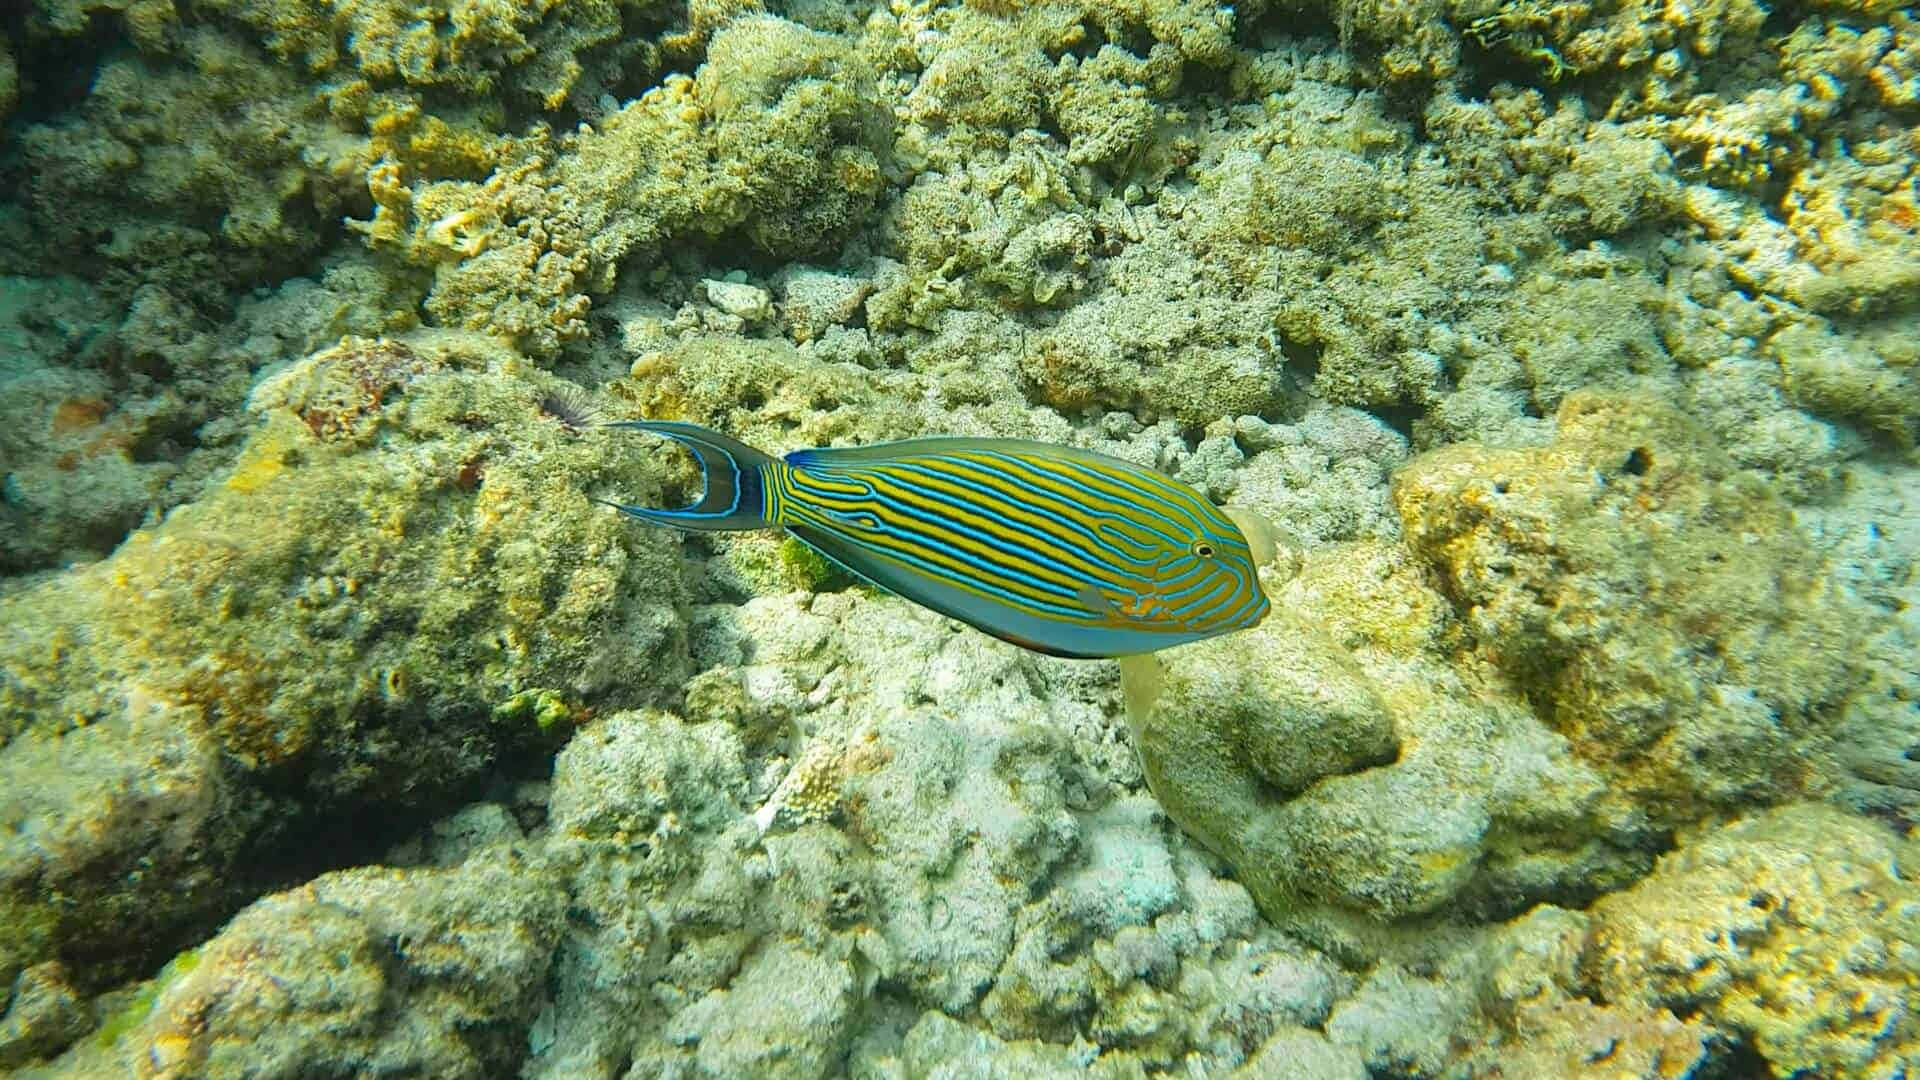 Vibrant Blue Surgeonfish Swimming In The Coral Reef Wallpaper